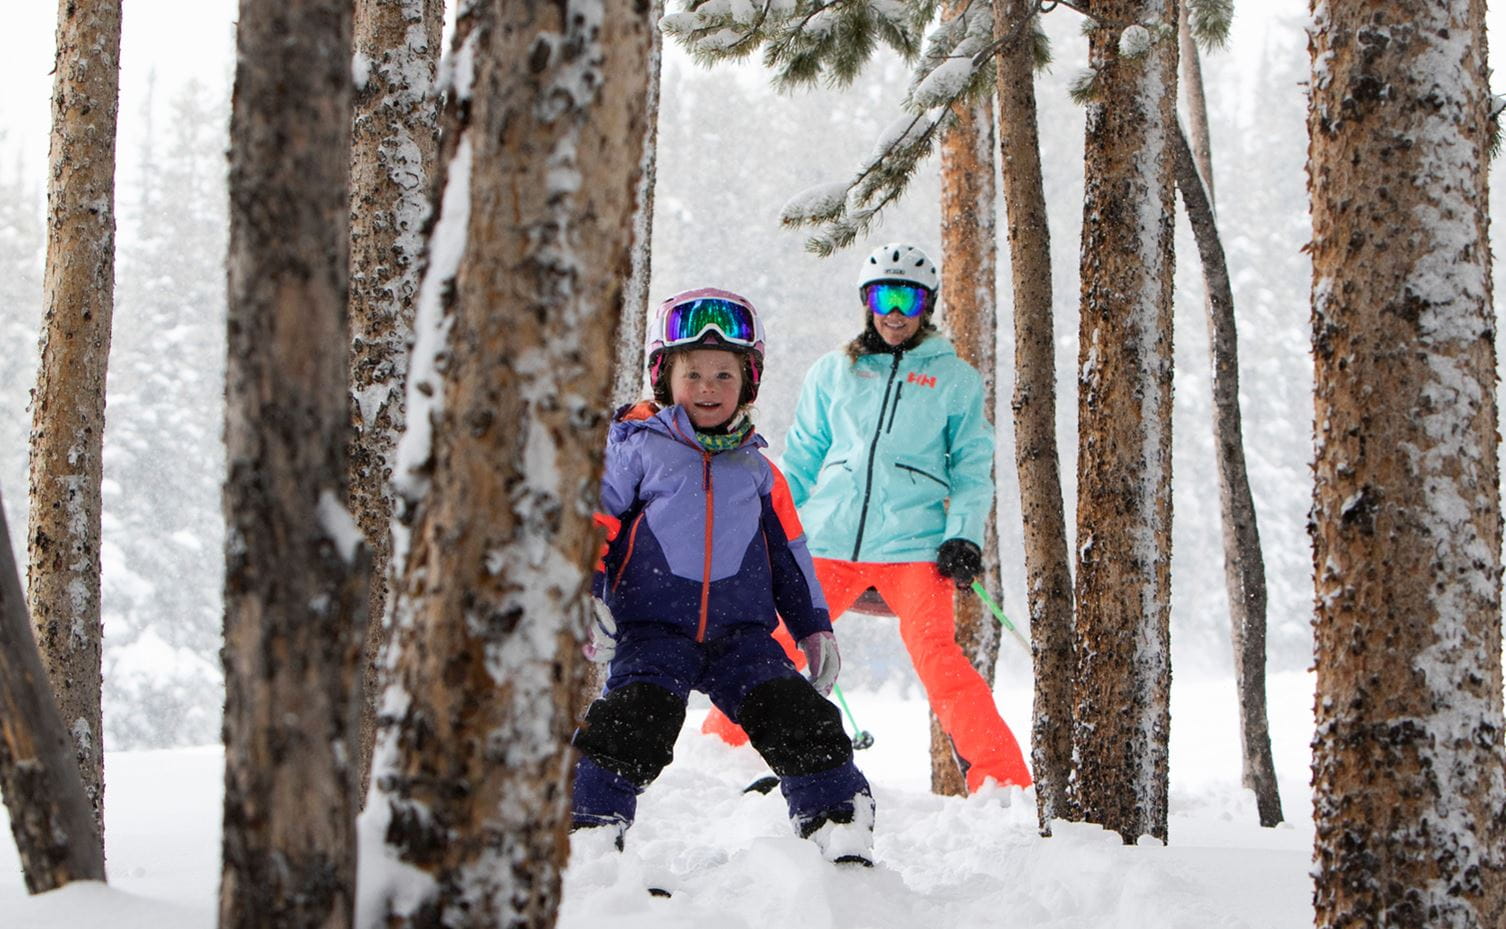 A child learning to ski amidst the trees at Aspen Snowmass